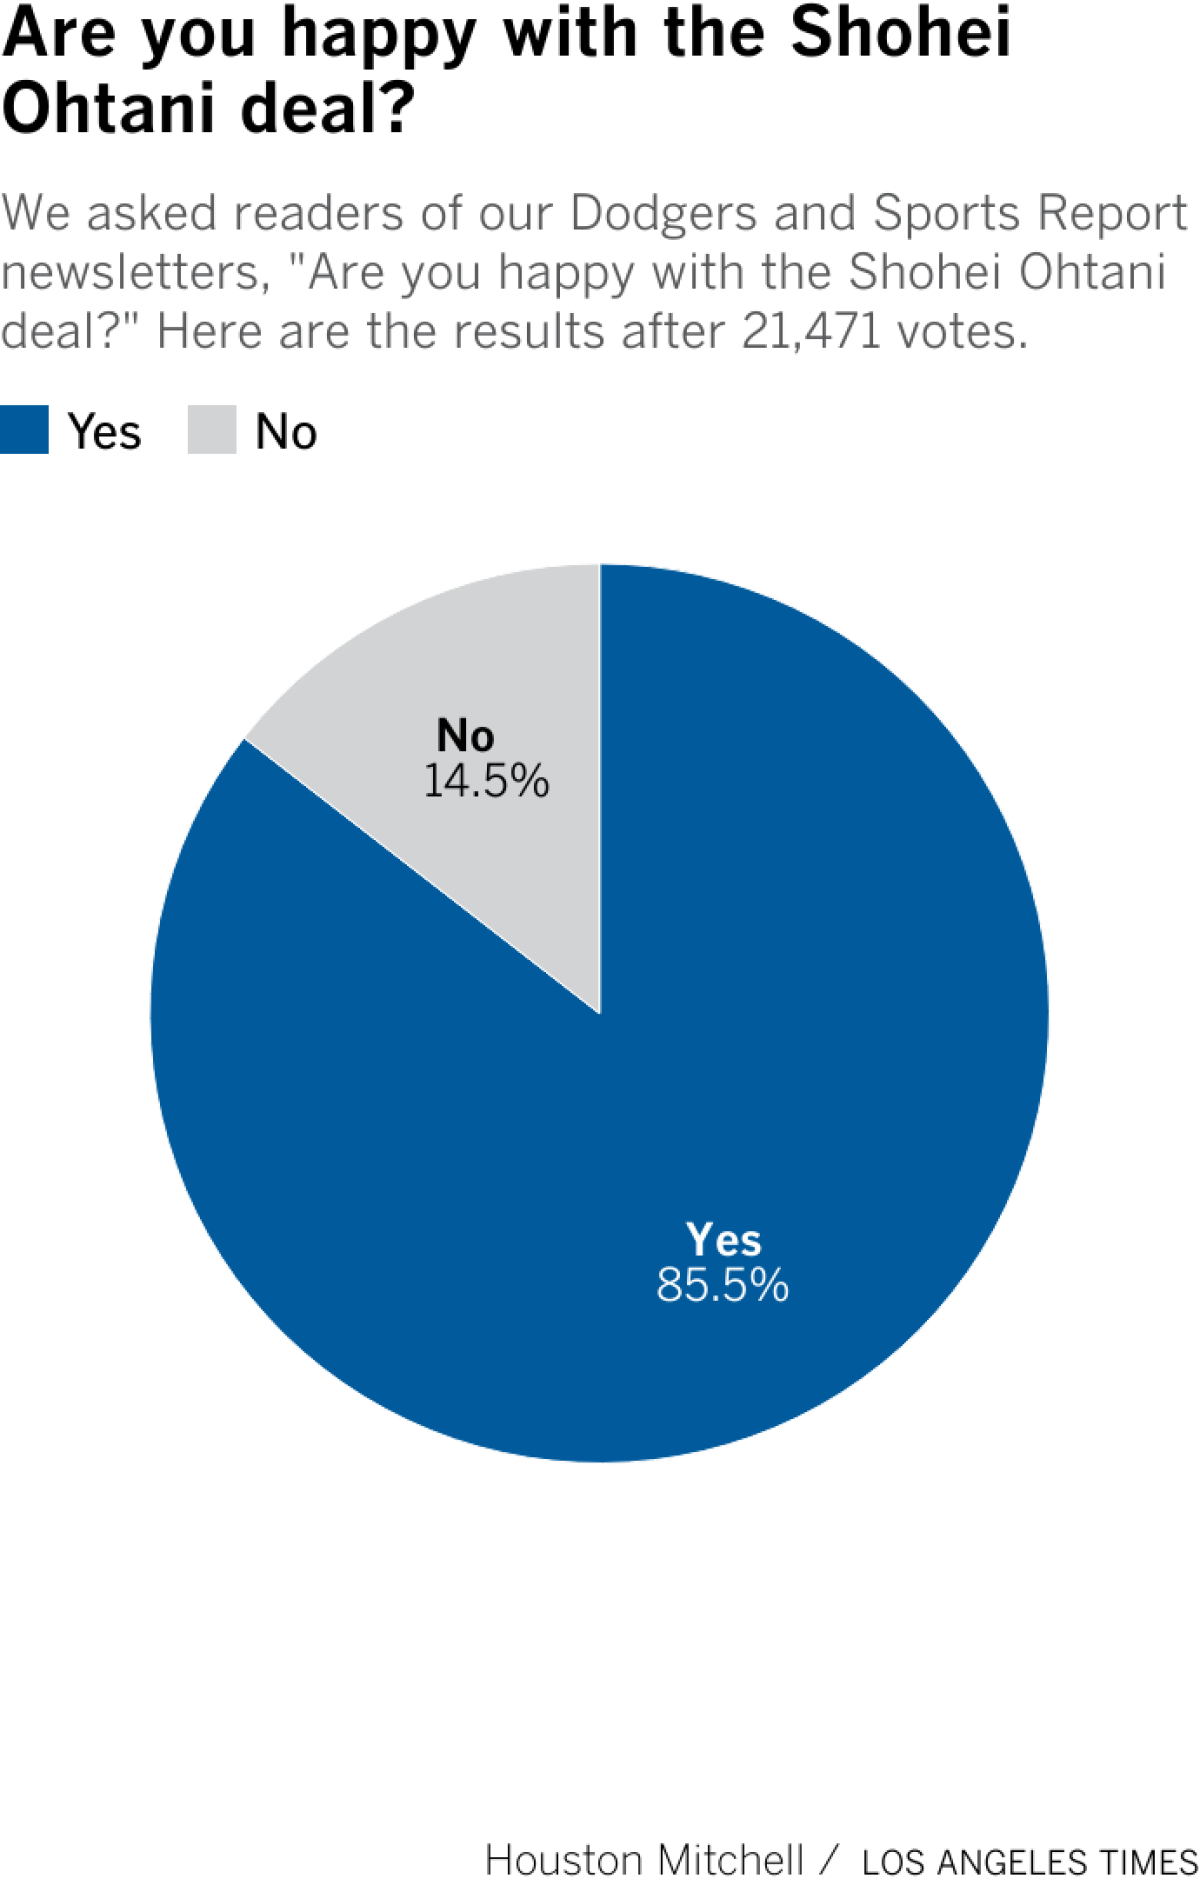 We asked readers of our Dodgers and Sports Report newsletters, "Are you happy with the Shohei Ohtani deal?" Here are the results after 21,471 votes.